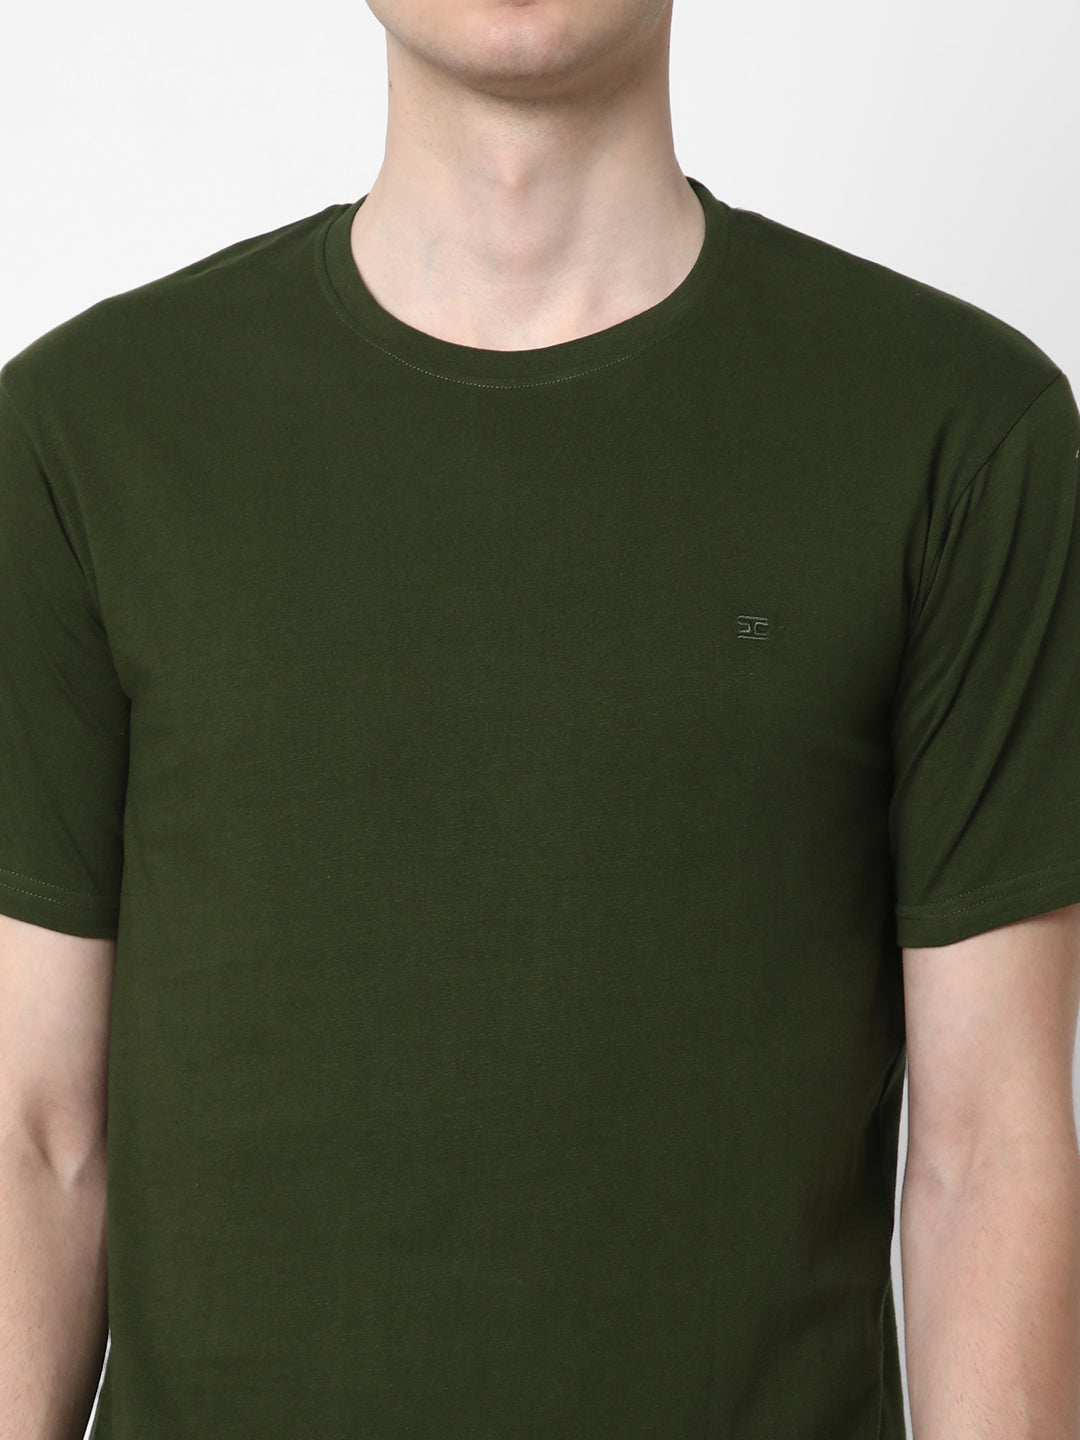 Cotstyle Cotton Fabrics Round Neck Short Length Plain Half Sleeve Casual & Daily Wear Men's T-Shirts -  Pack of 1 - Rifle Green